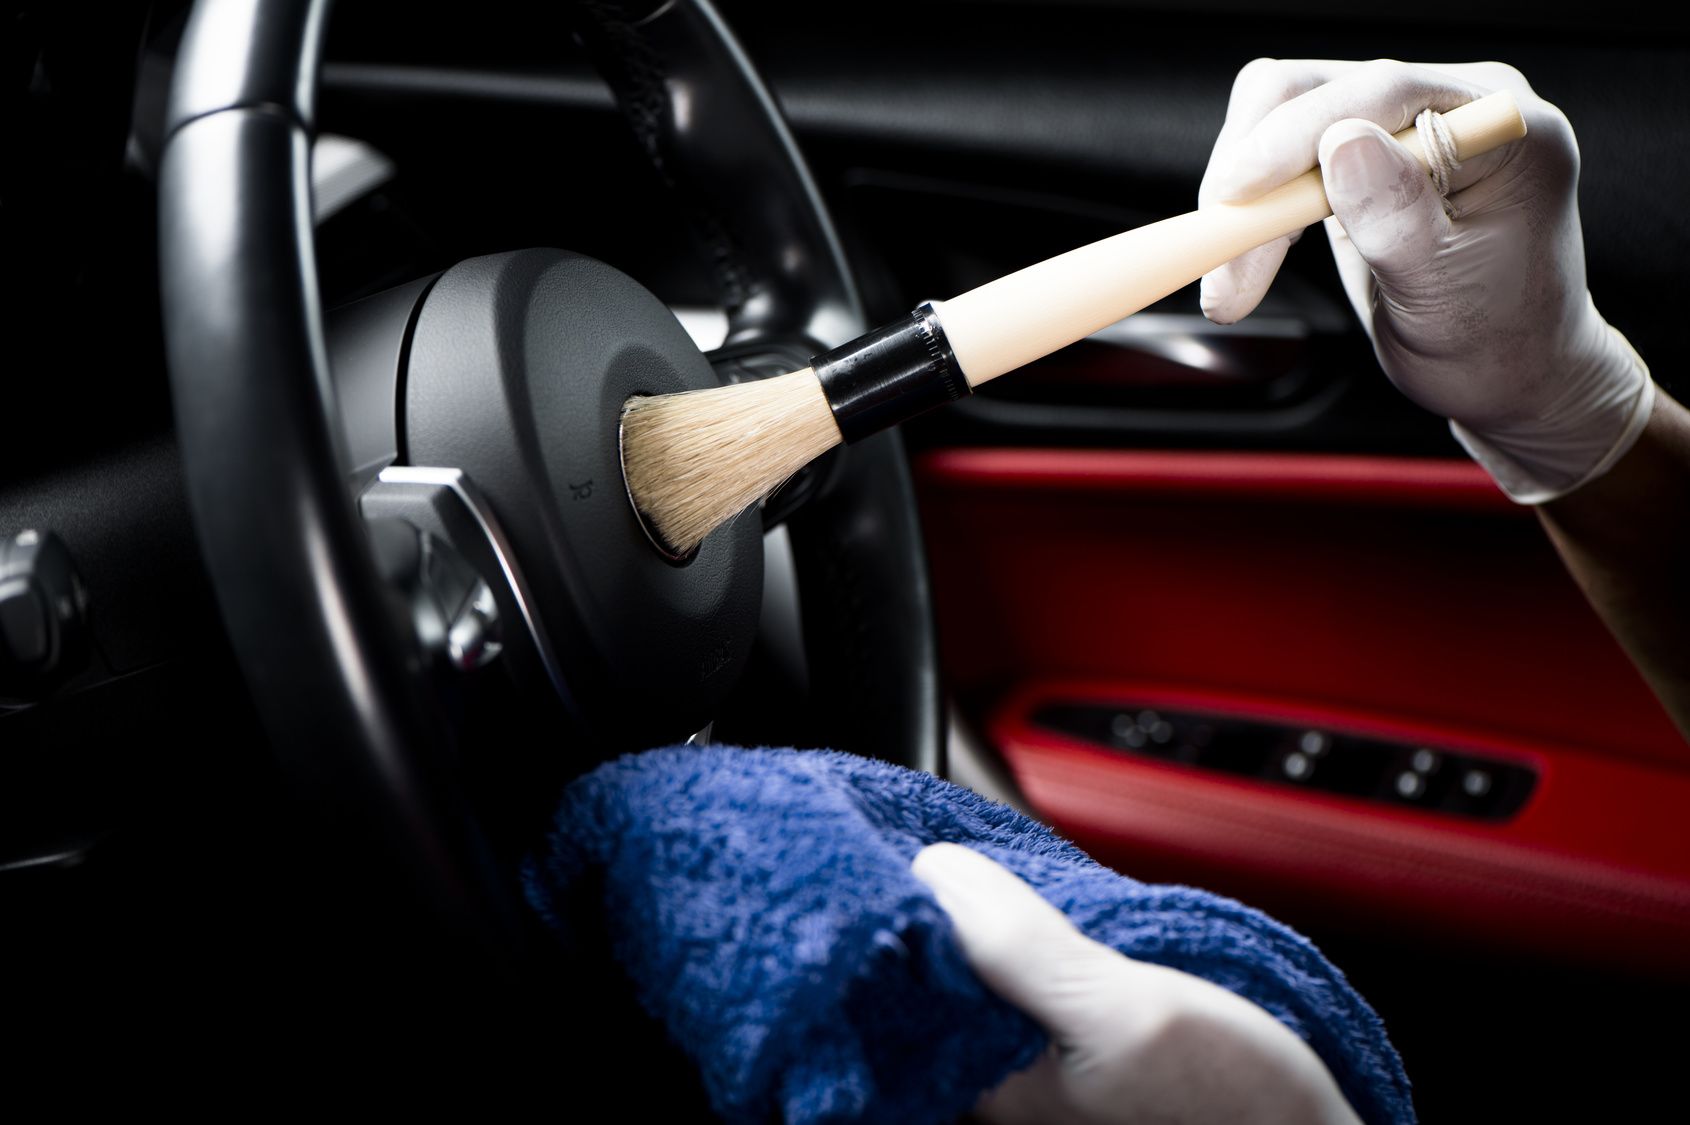 A person is cleaning the steering wheel of a car with a brush.